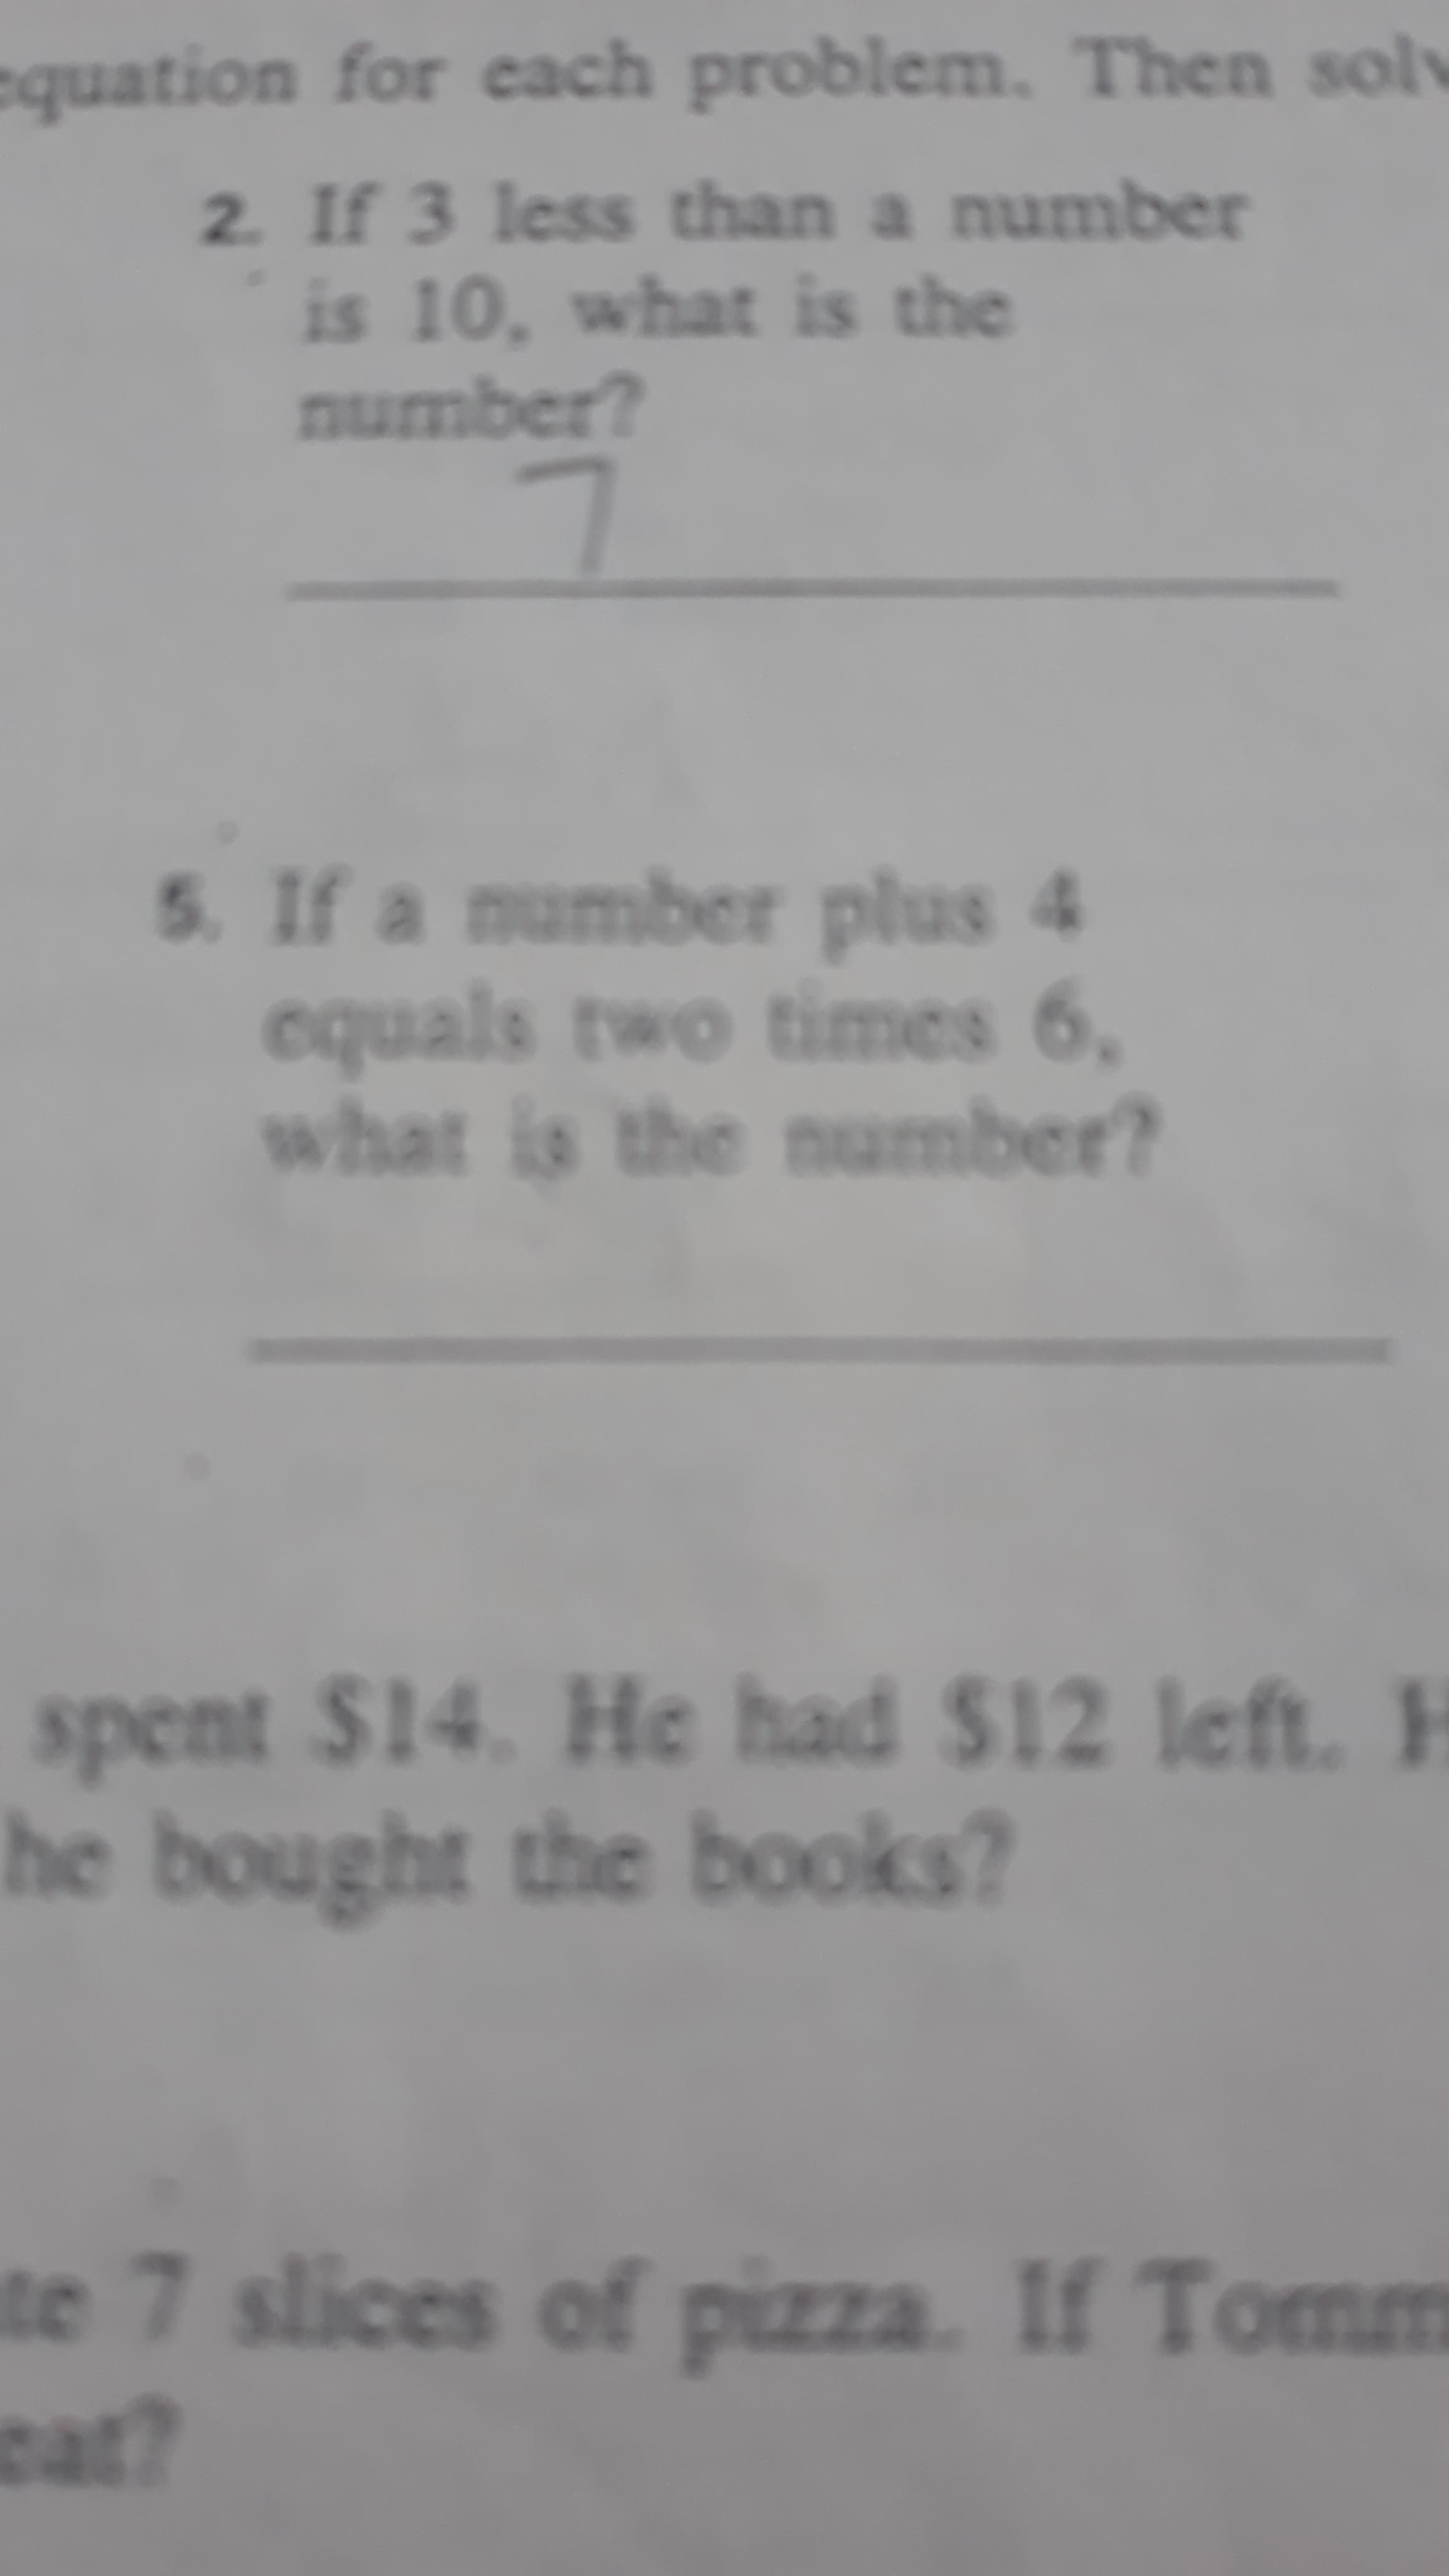 5. If a number plus 4
equals two times 6,
what is the number?
